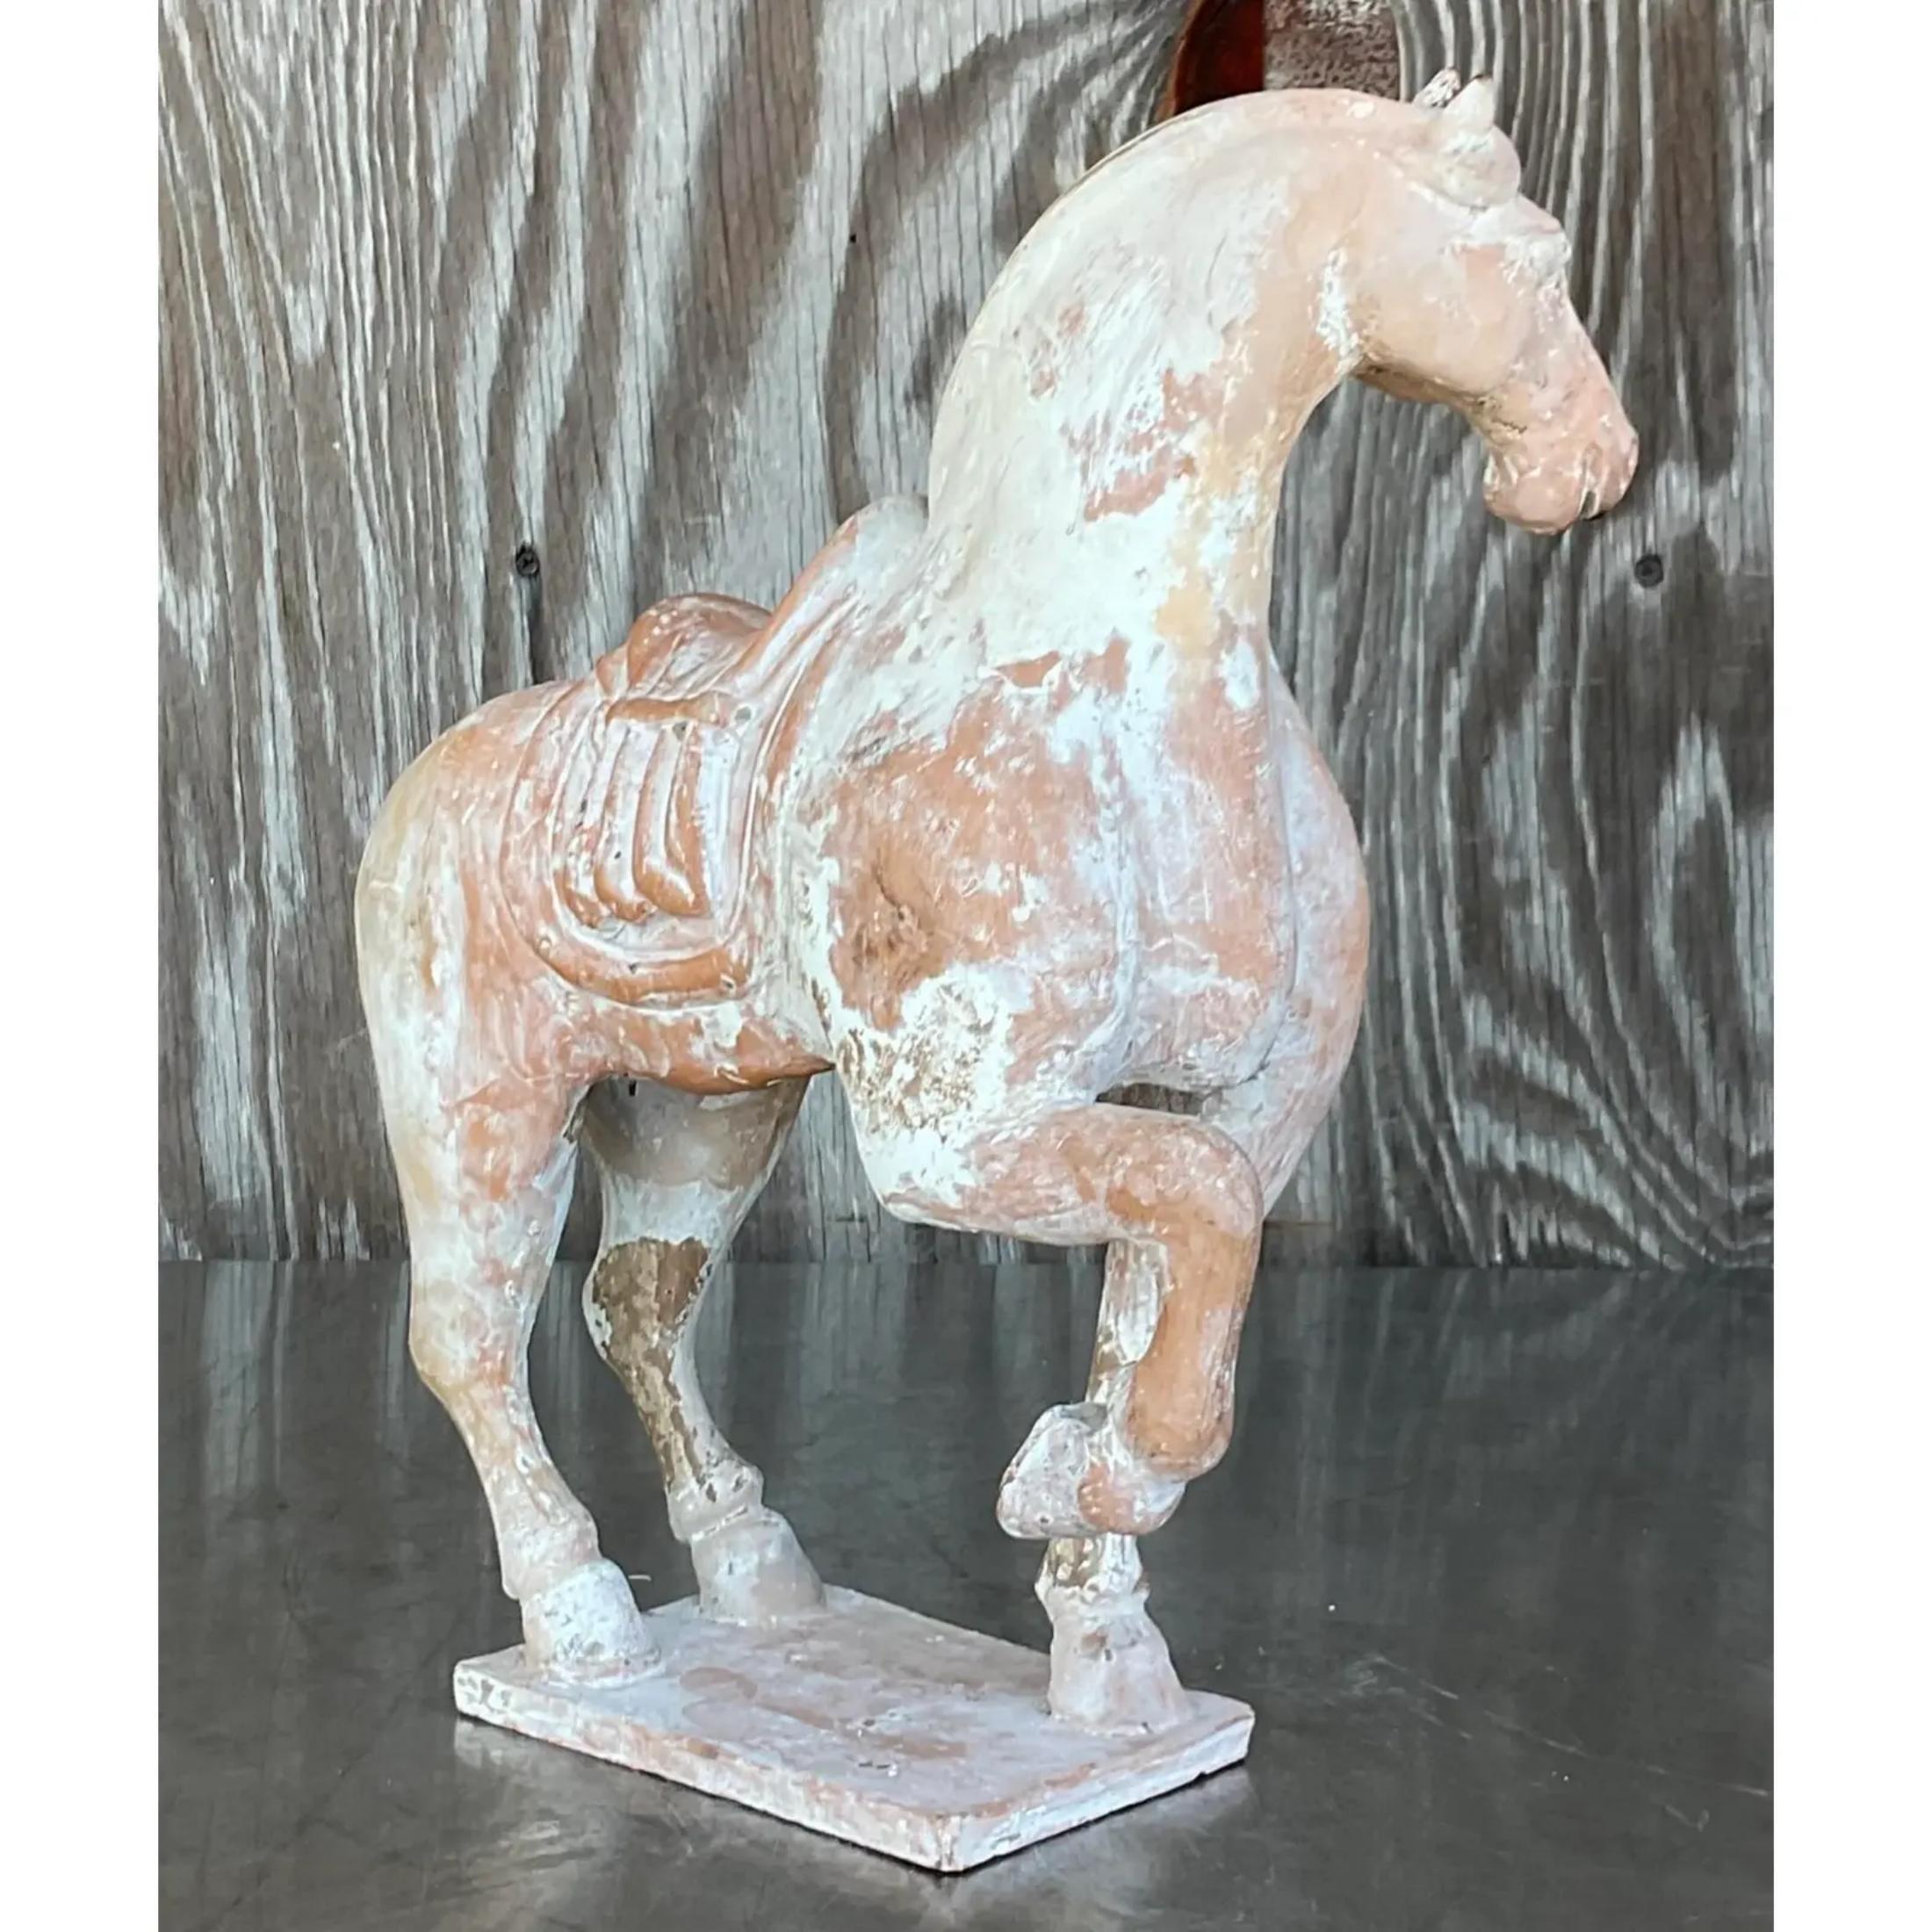 A fabulous vintage Asian Horse. A chic replica from the Tang Dynasty era. Beautiful terra Cotta form with gorgeous white washed detail. Acquired from a Palm Beach estate